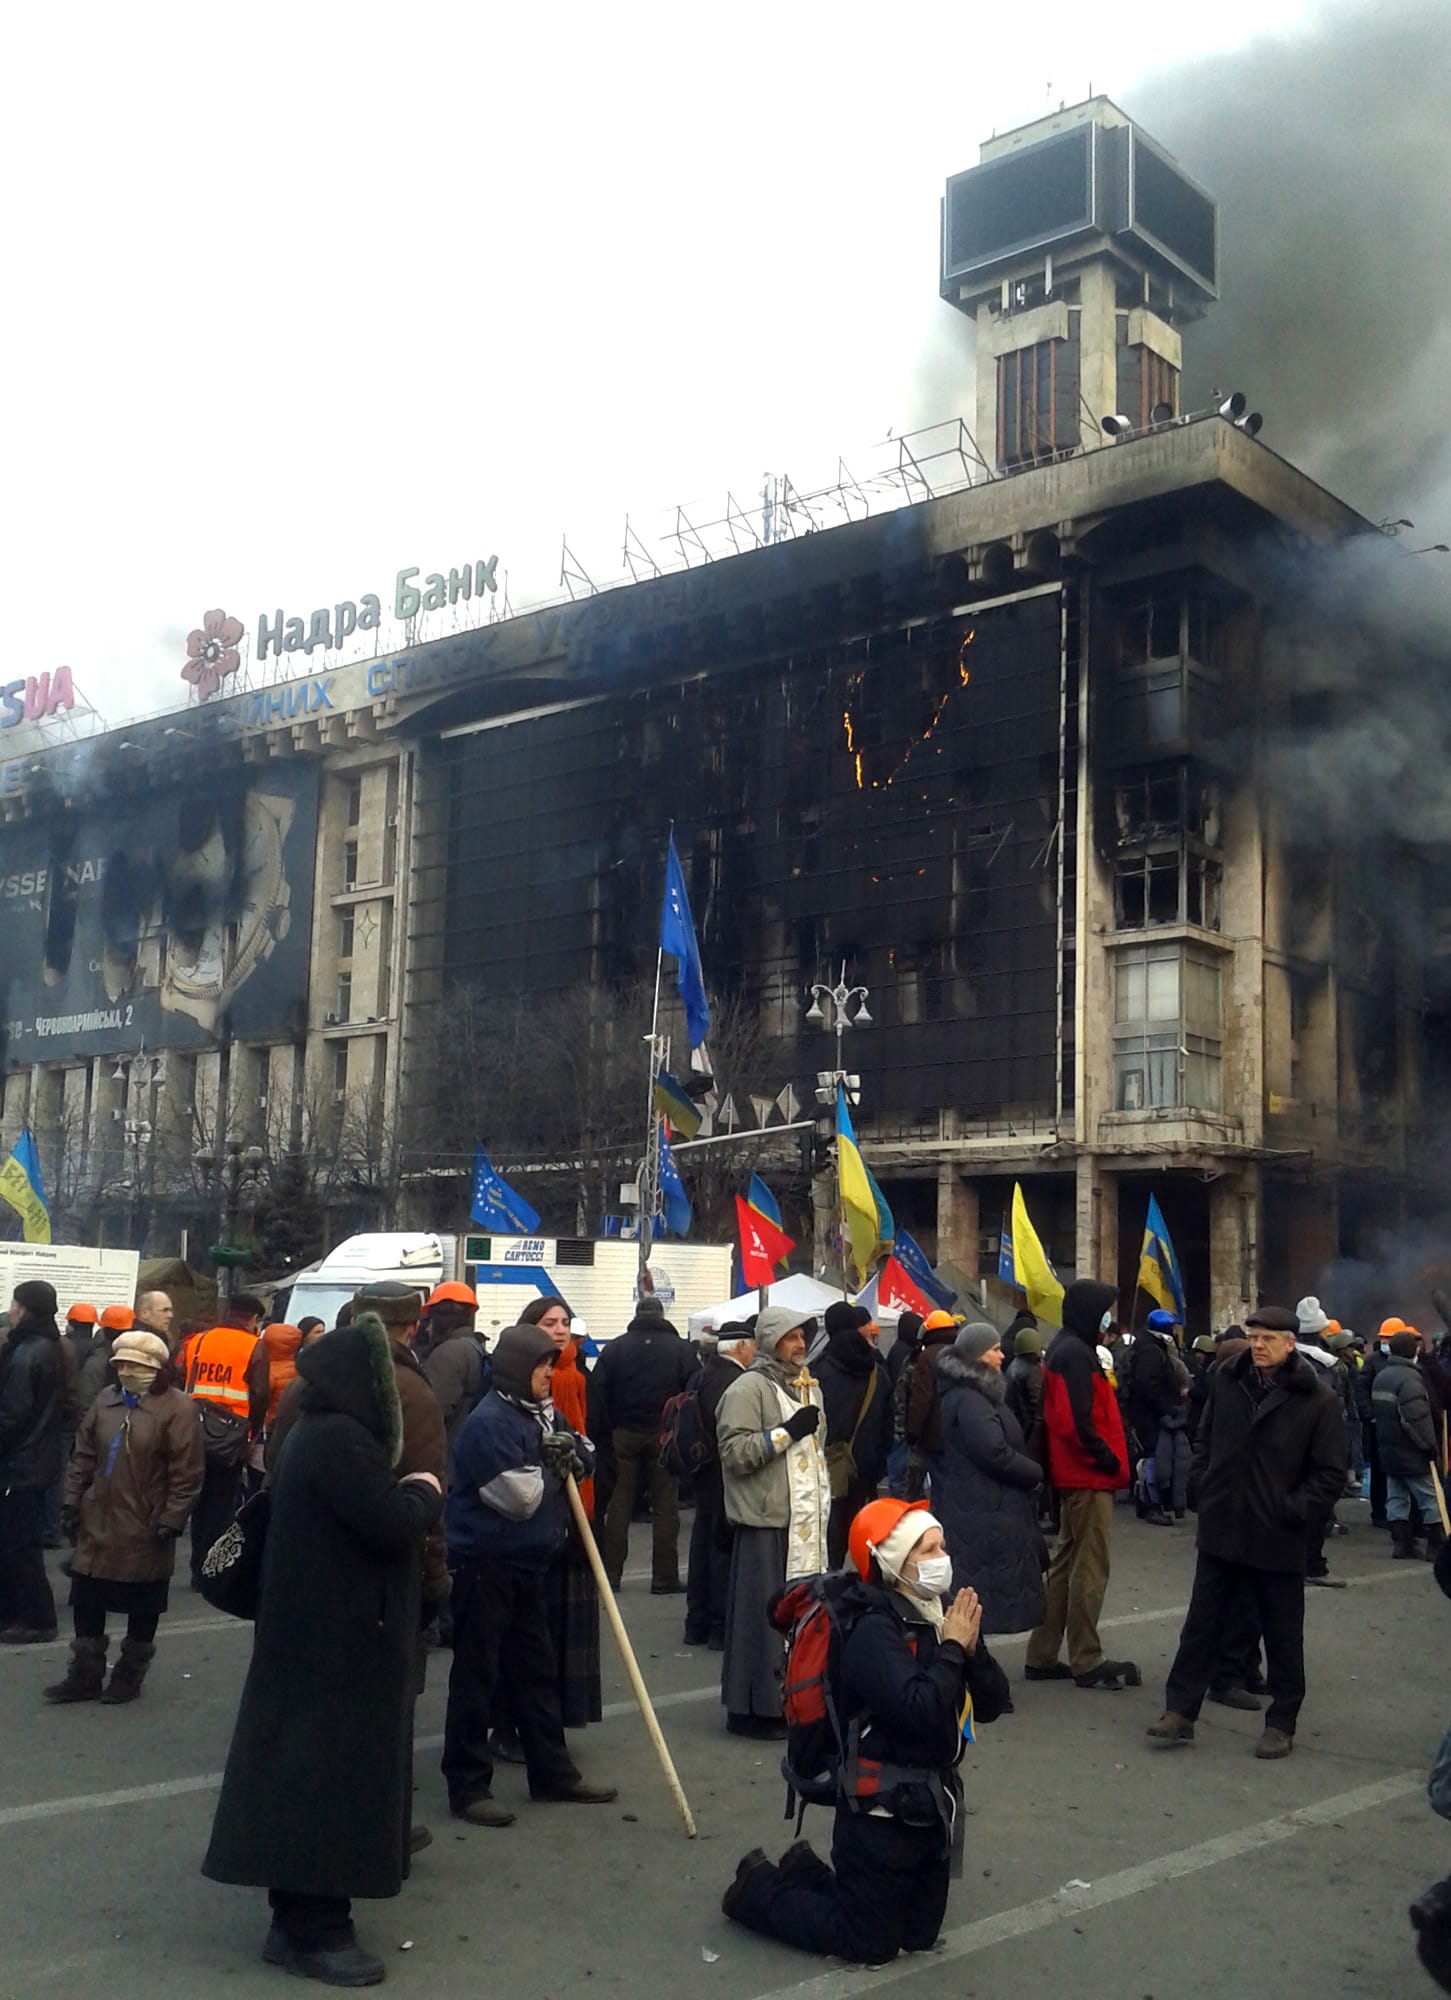 A young woman wearing a safety helmet kneels in prayer as smoke rises from a burning building on a corner of Independence Square in Kiev, Ukraine.